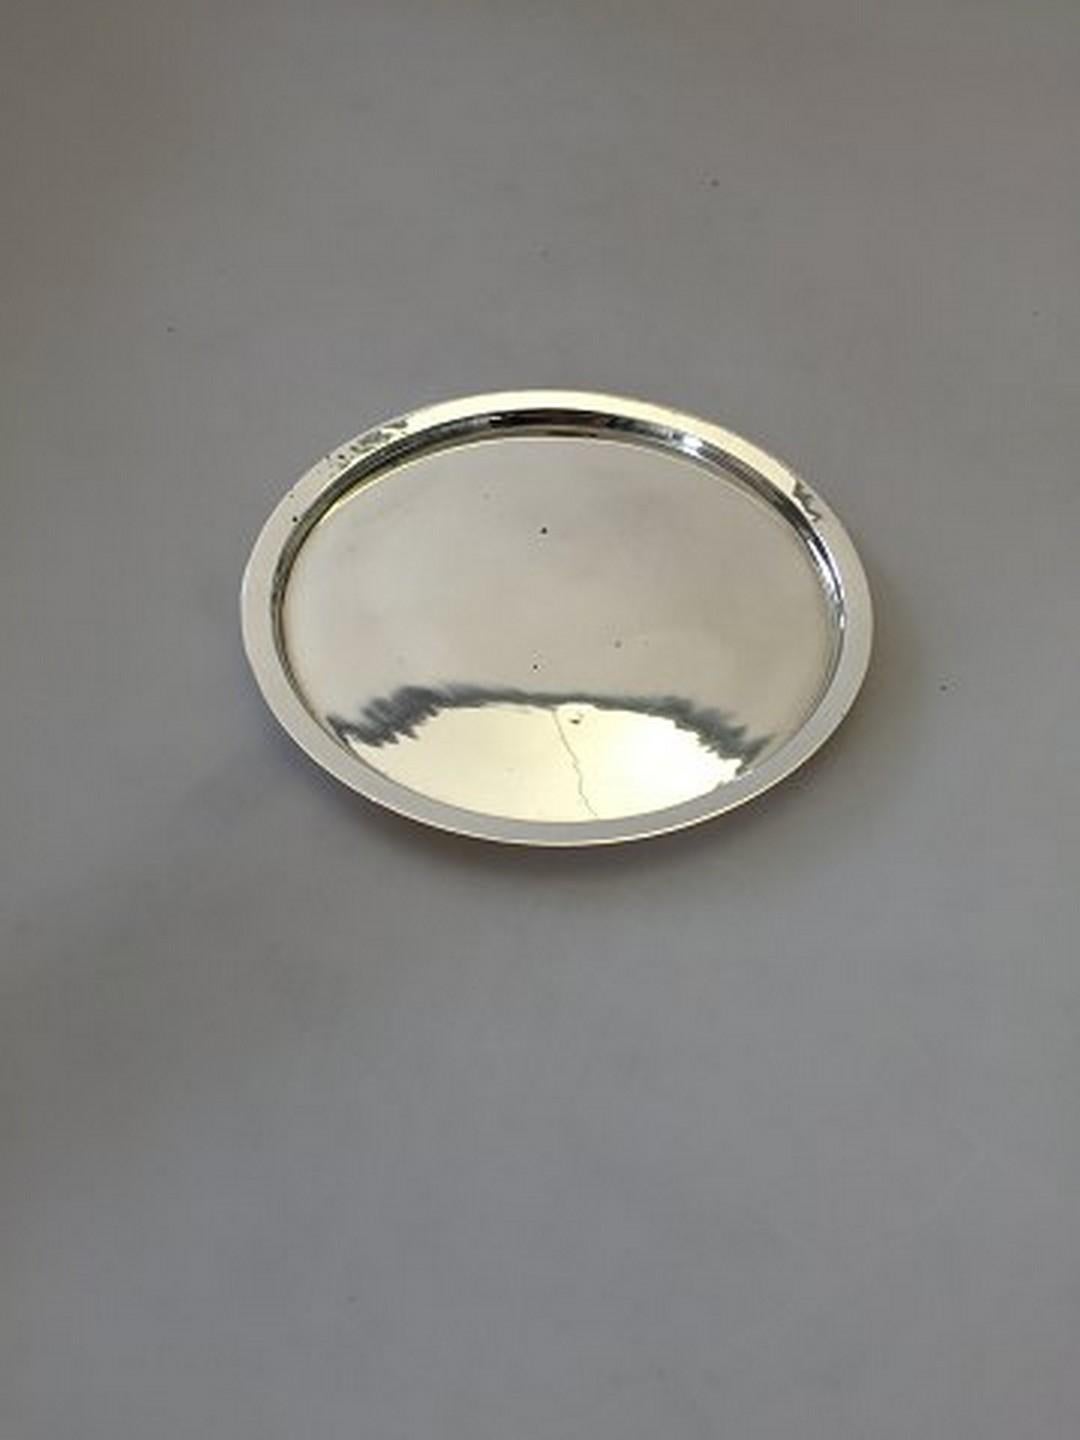 Georg Jensen sterling silver bottle coaster. Measures 13.8cm and is in good condition.
Item no.: 188535.